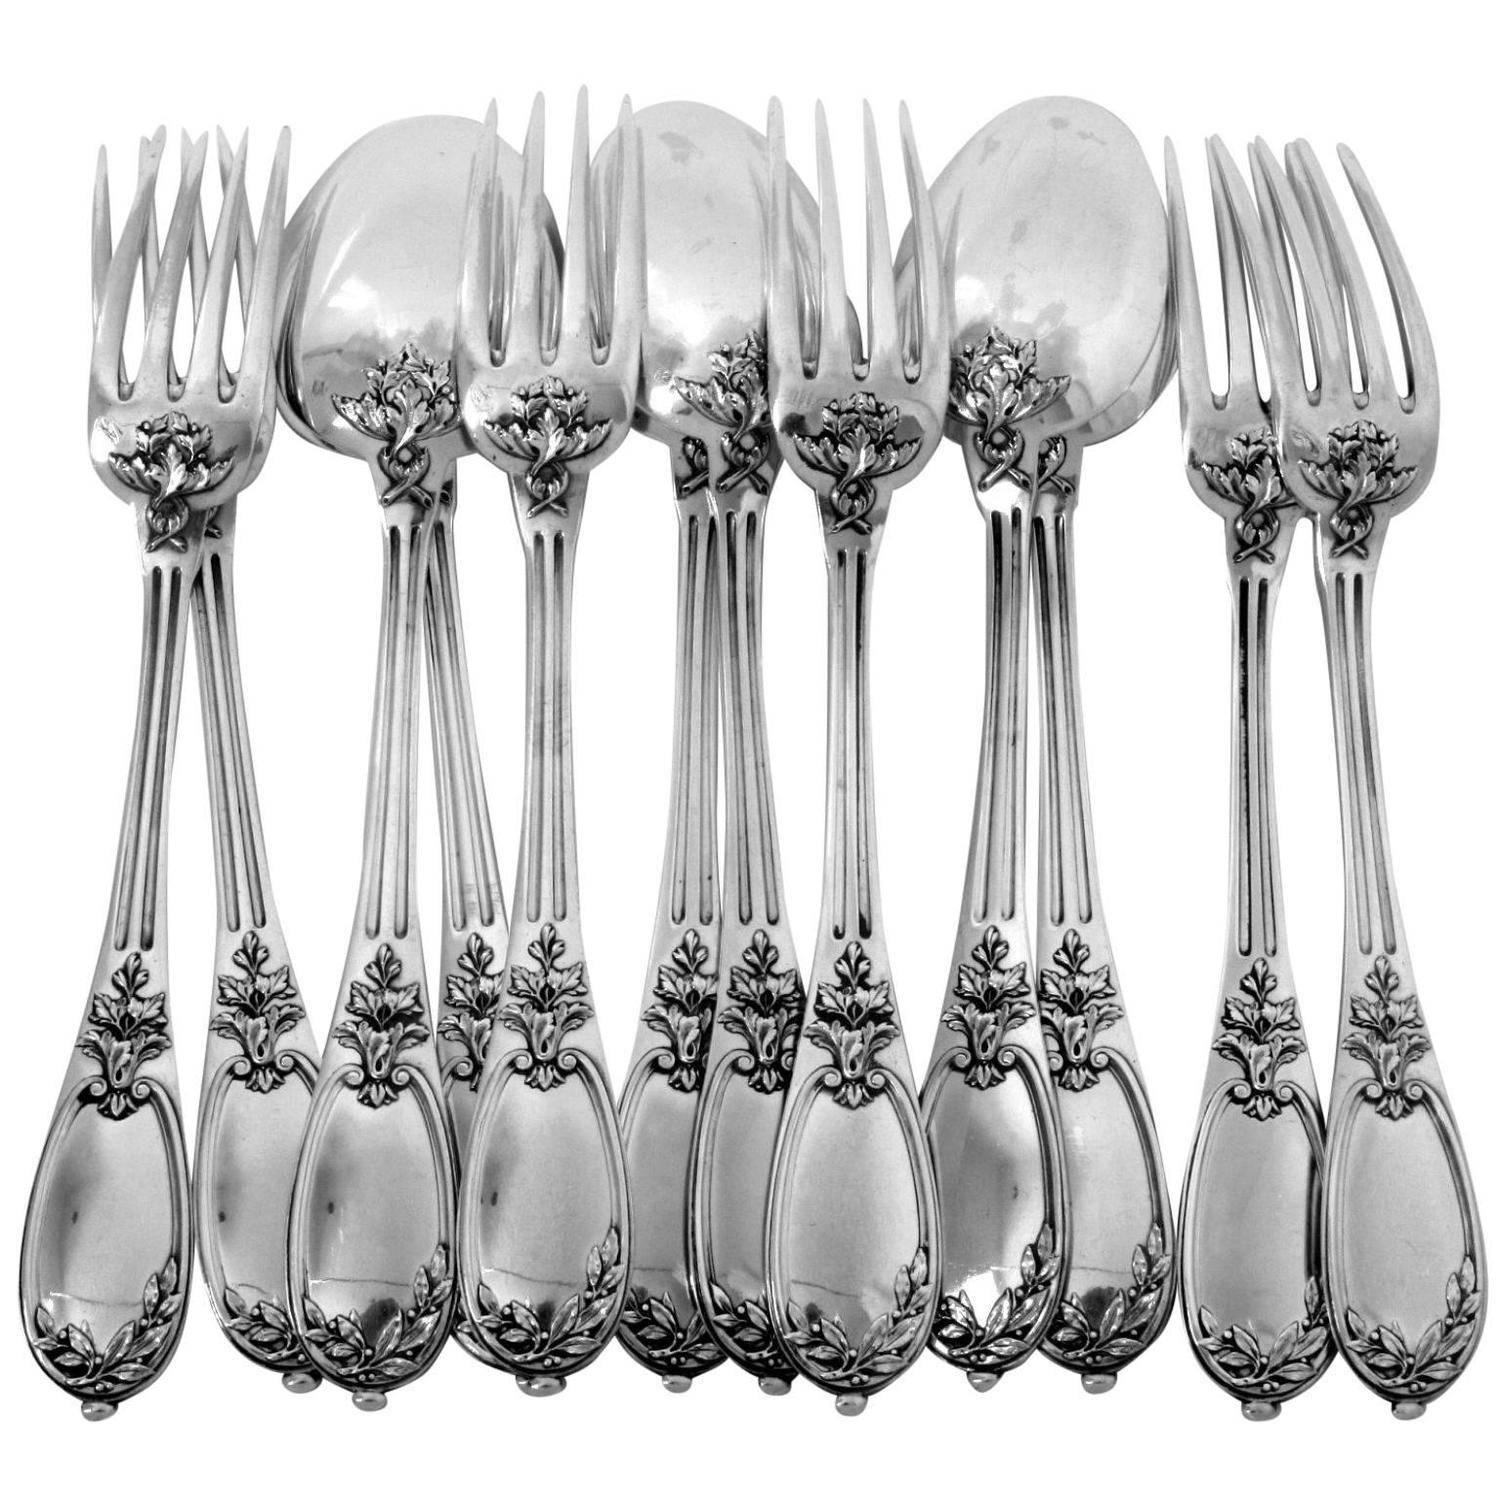 Henin Gorgeous French Sterling Silver Dinner Flatware Set of 12 Pc Neoclassical For Sale